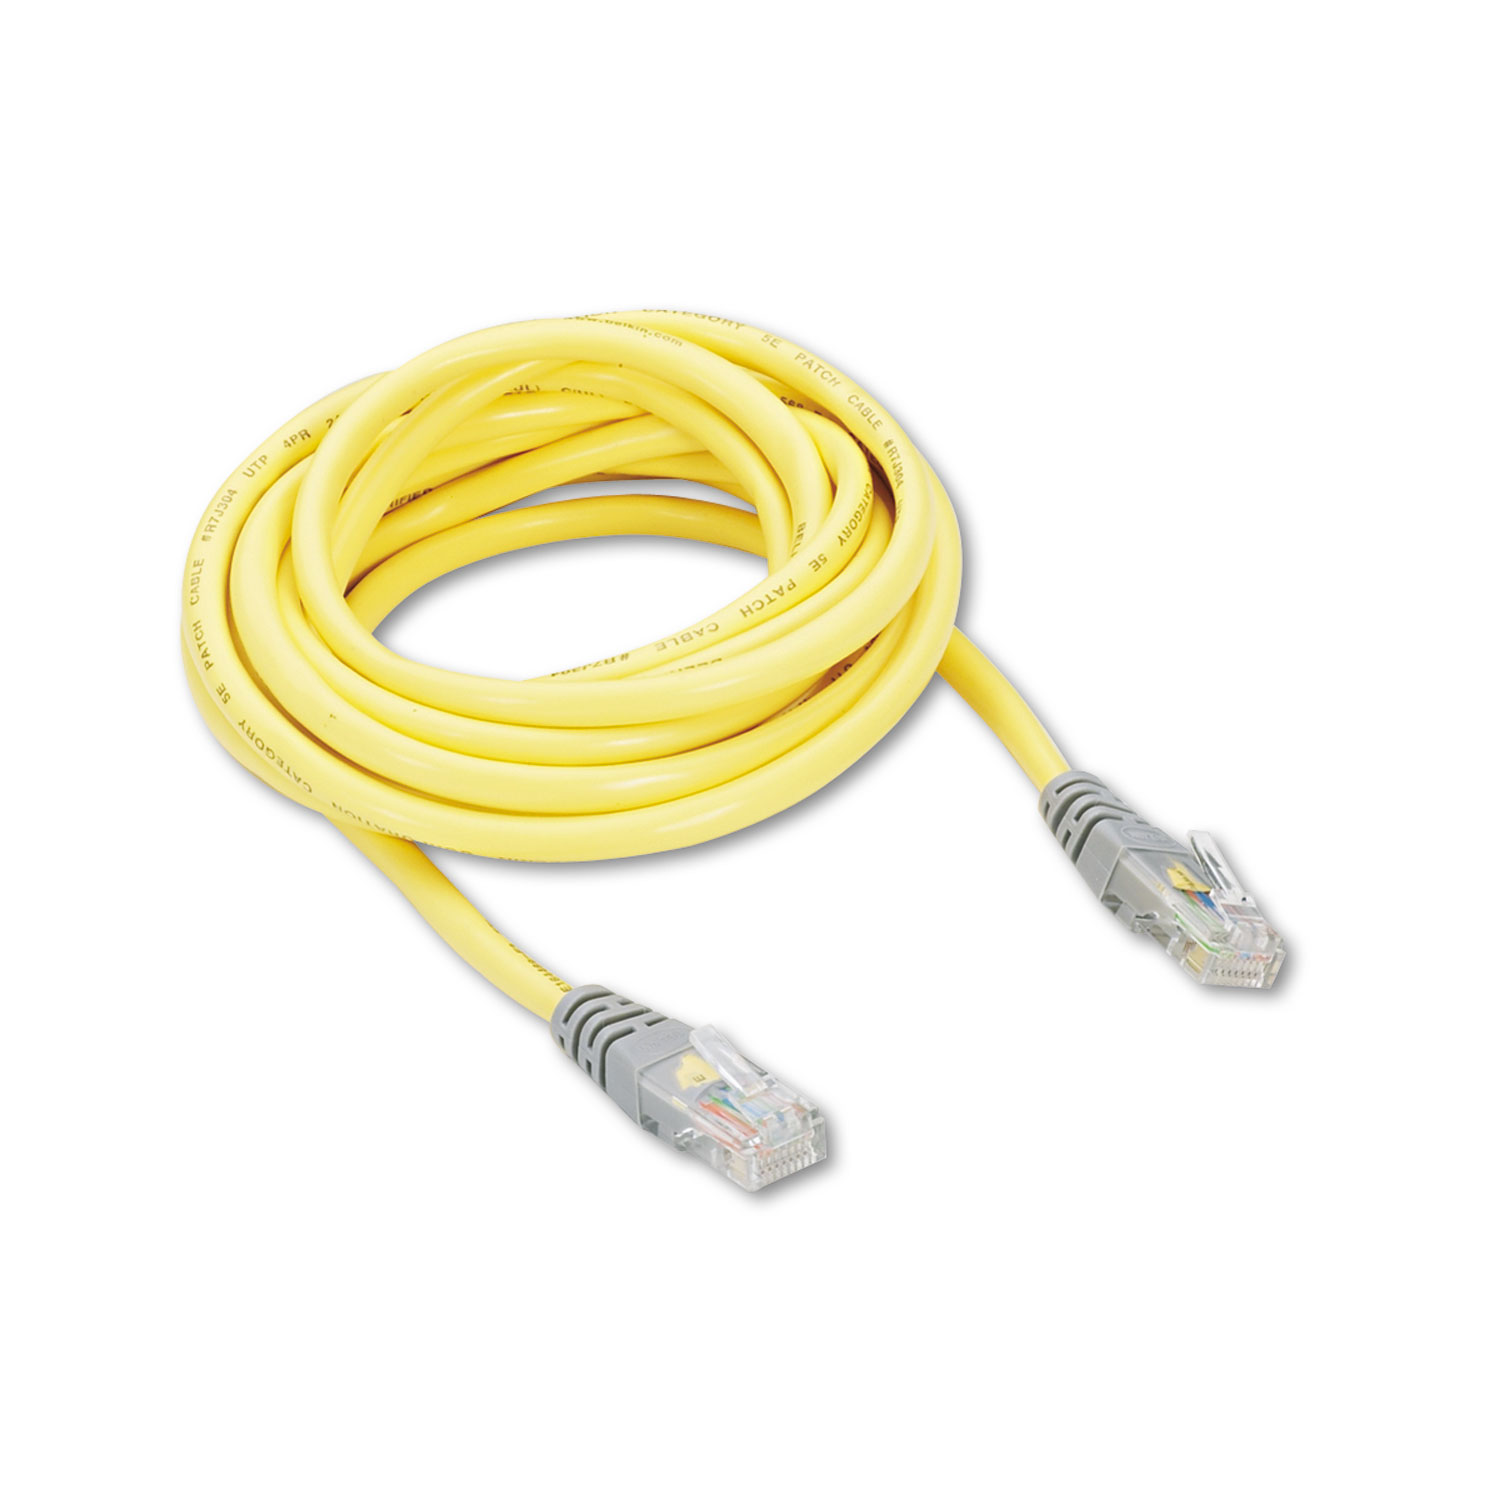 CAT5e Crossover Patch Cable, RJ45 Connectors, 10 ft., Yellow